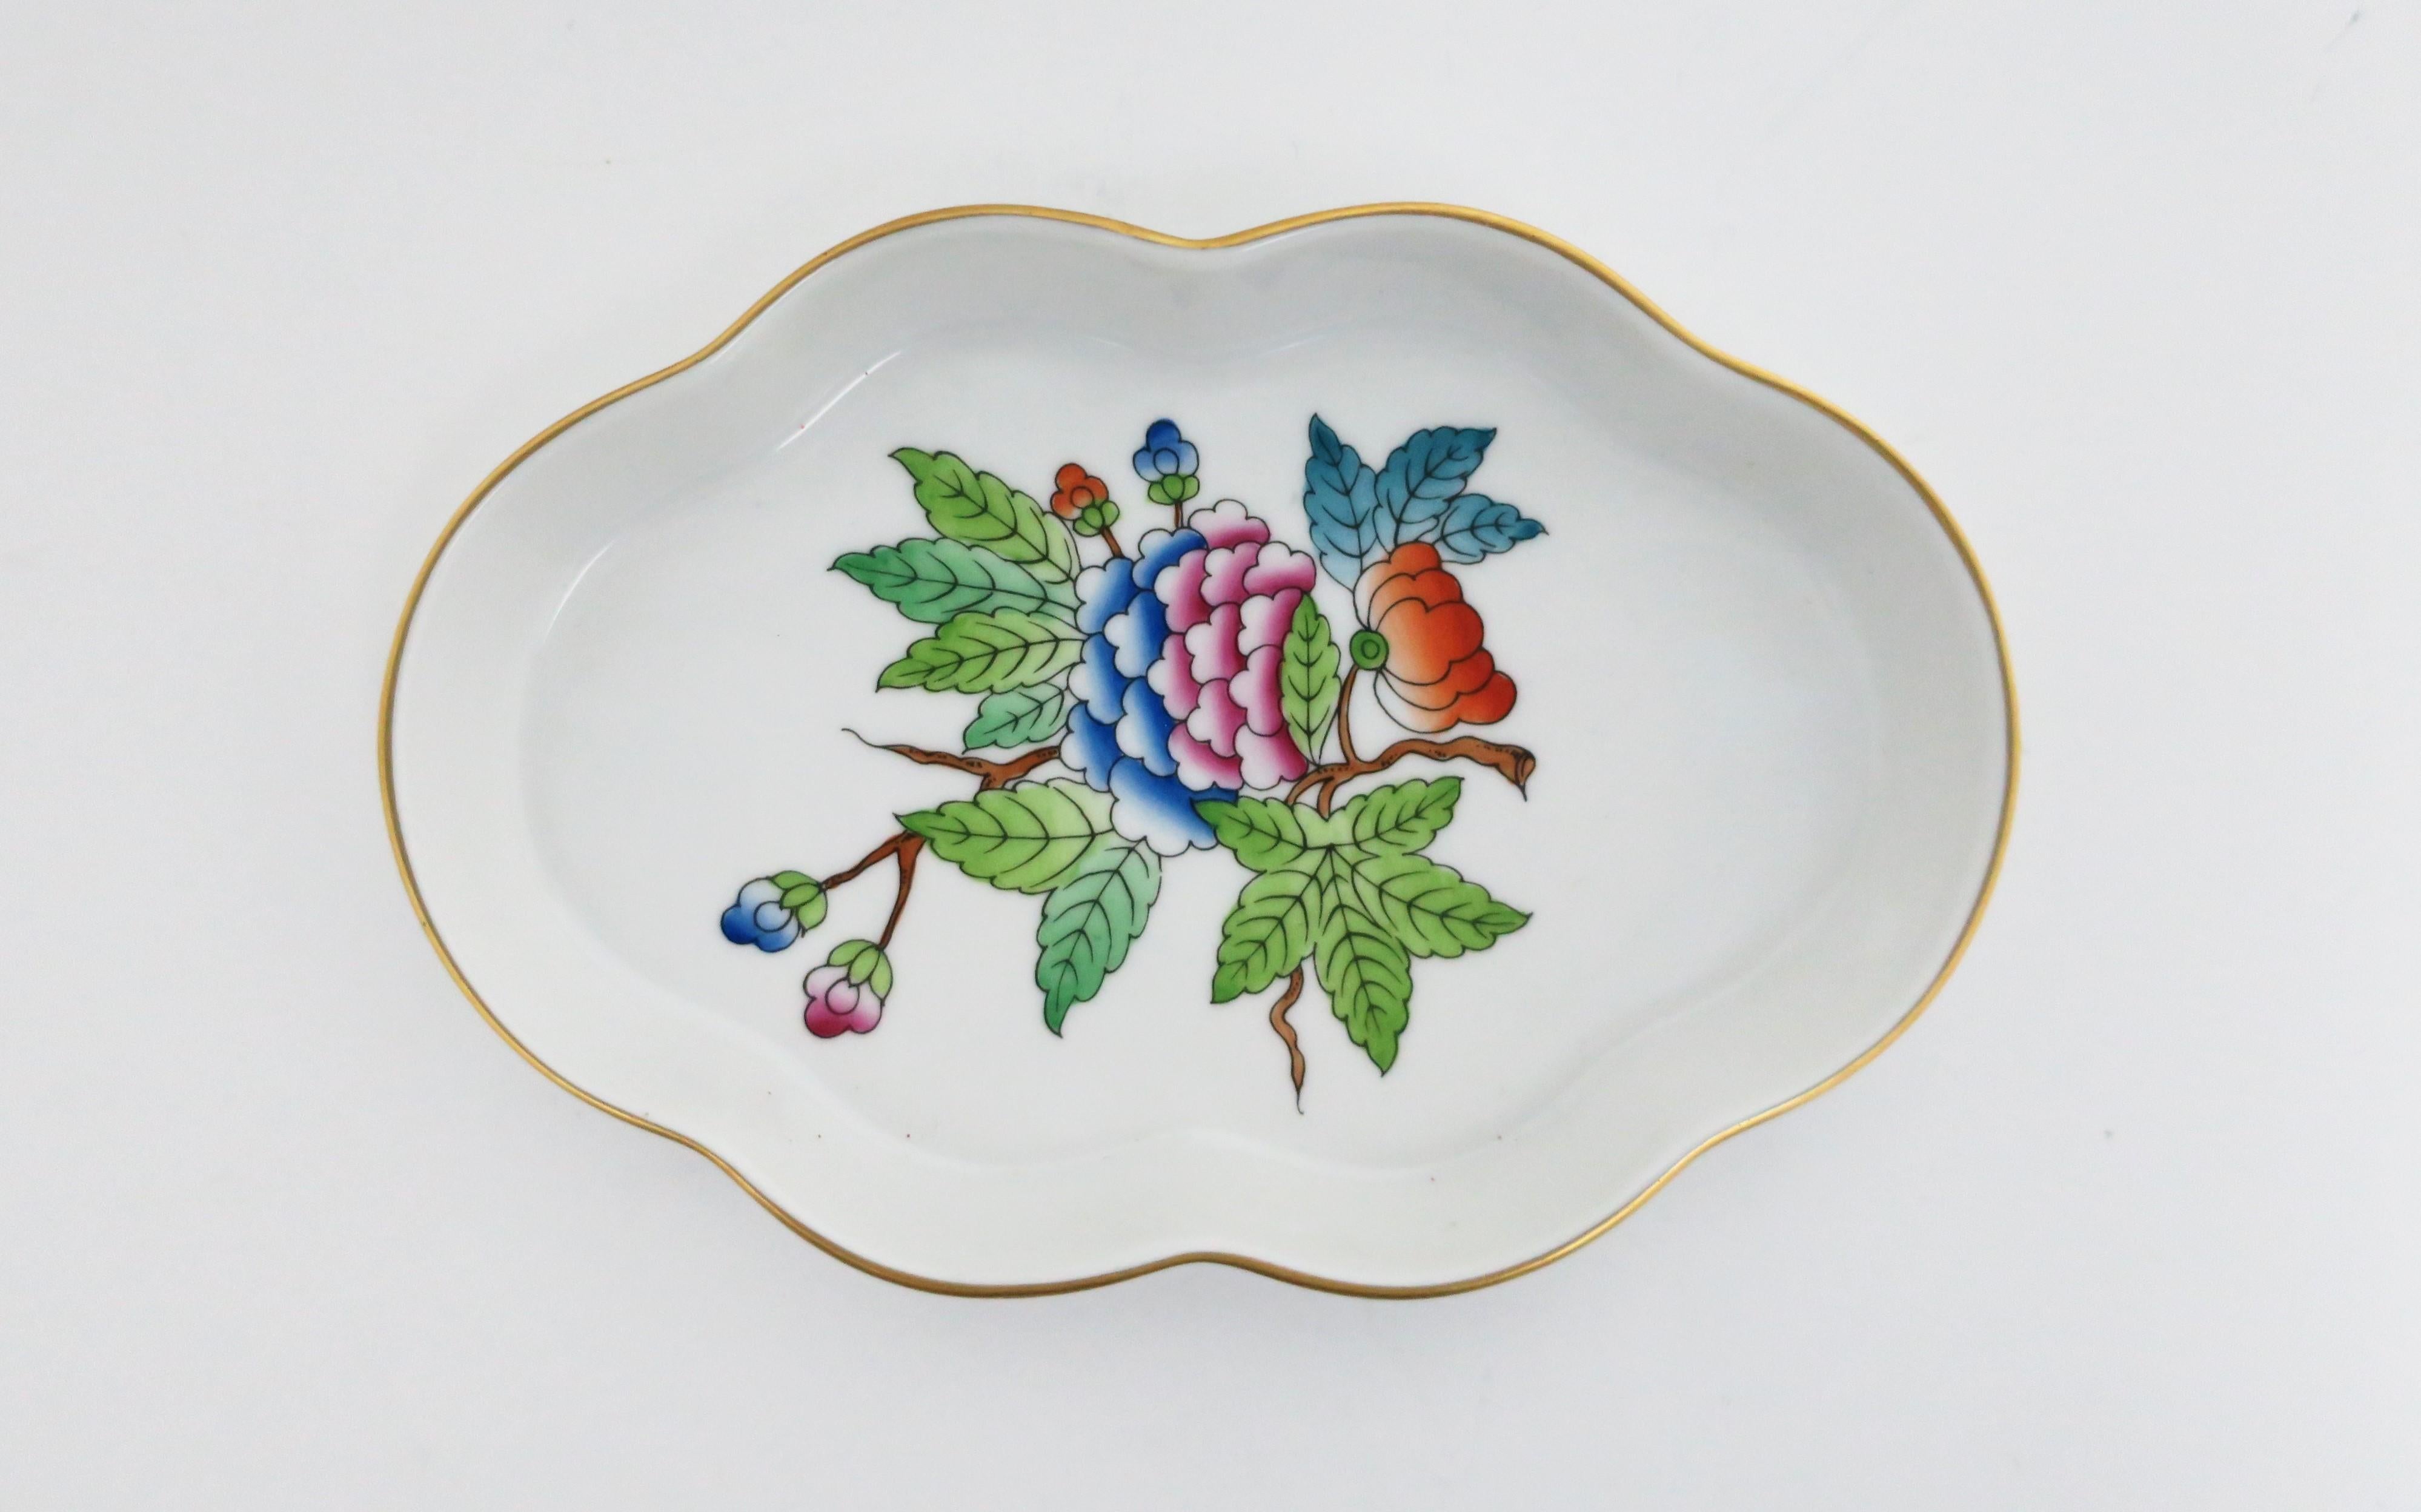 A beautiful vintage Herend white porcelain jewelry dish, circa 20th century, Hungary. A beautiful oval piece with colorful flower and leaf design at center and a scalloped edge finished with gold detail. Colors are vibrant; greens, blues, pinks, and